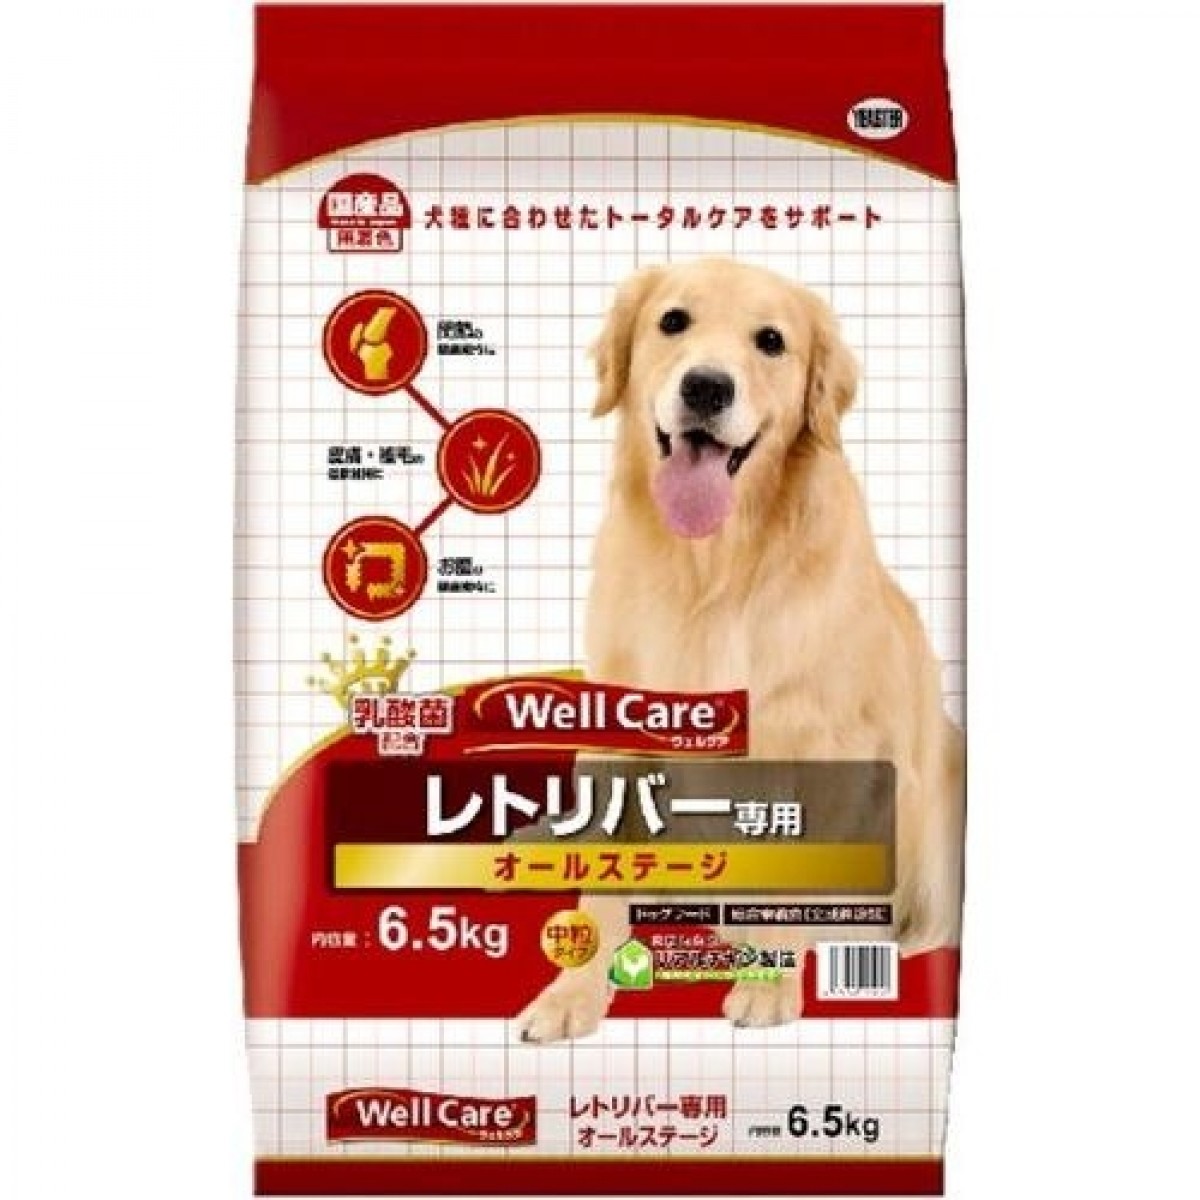 Well Care Golden Retriever Dry Dog Food for Adult Dogs 6